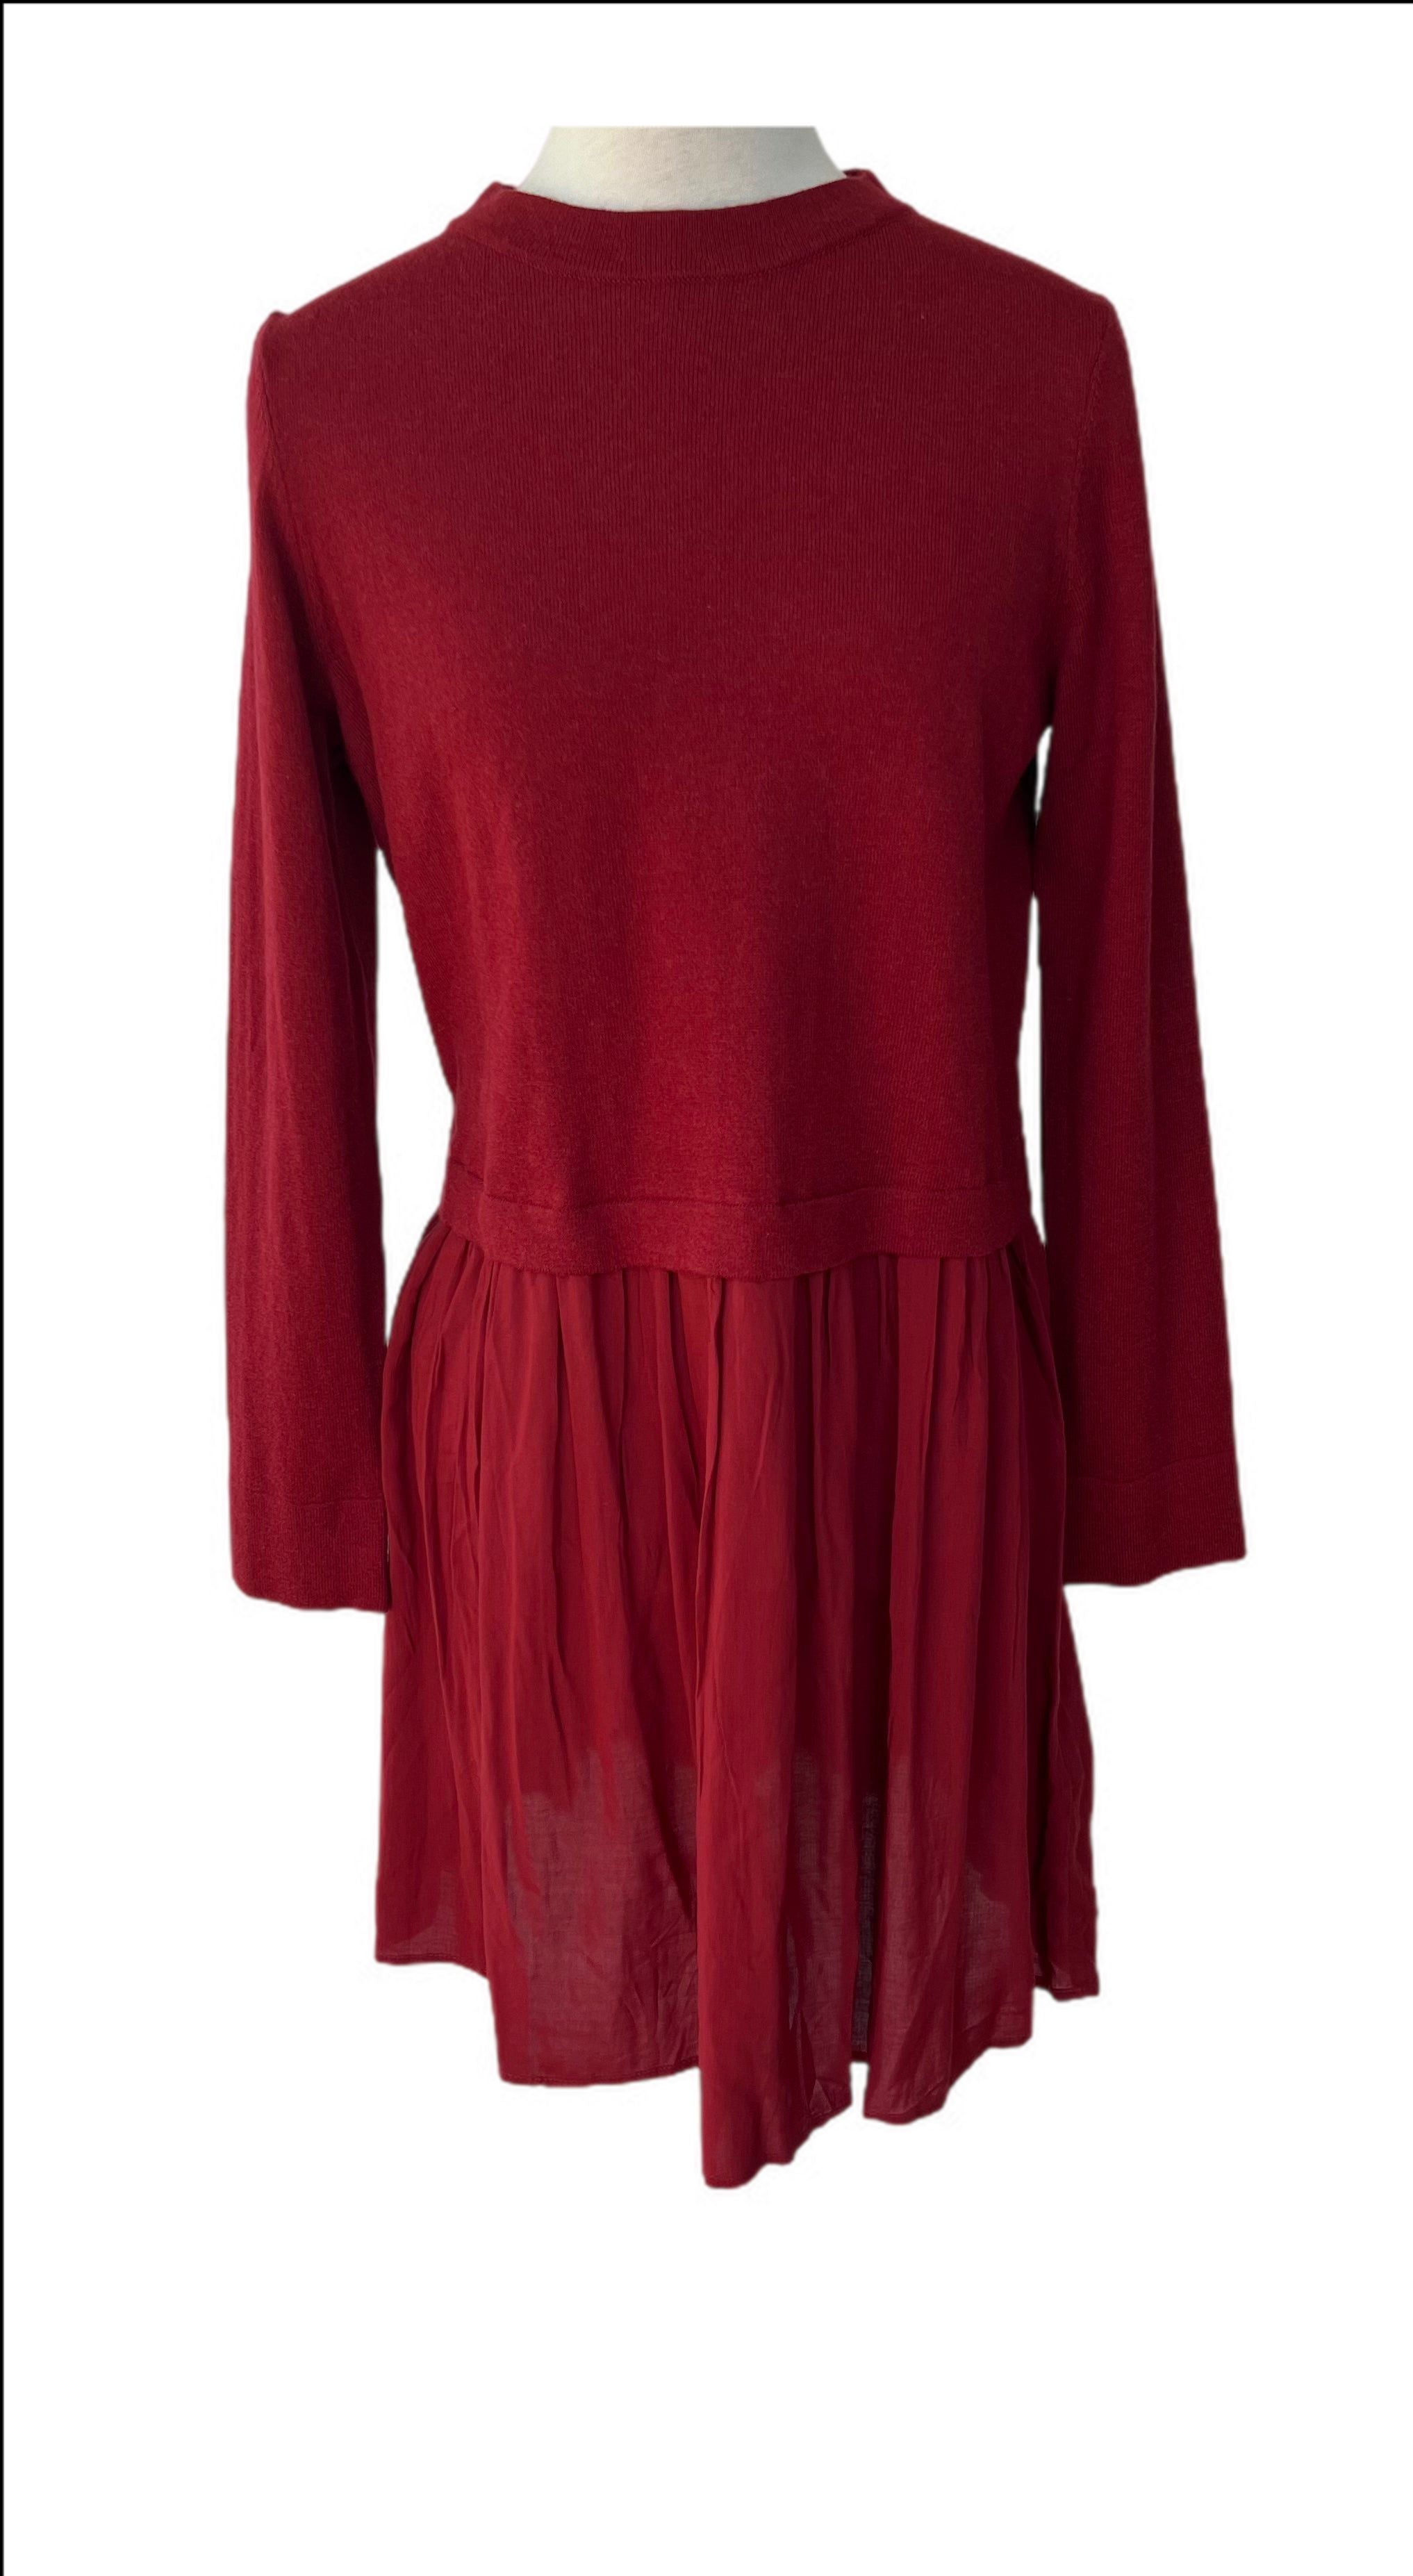 Dress with knit top and Viscose skirt